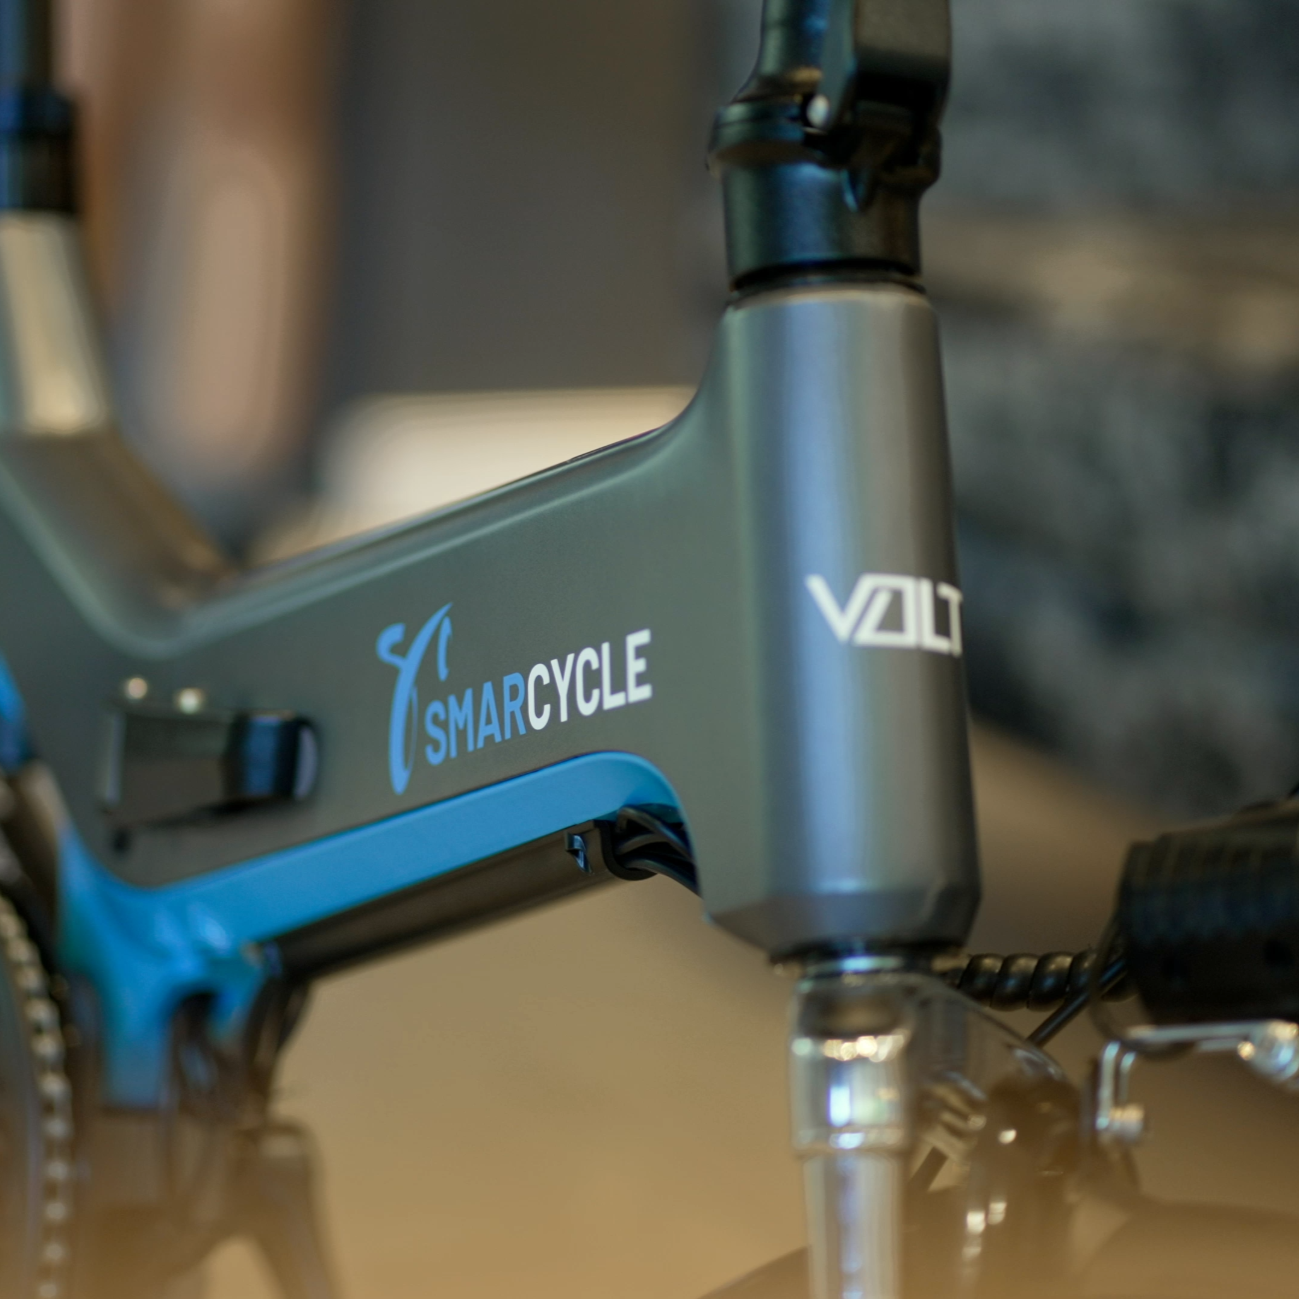 SMARCYCLE